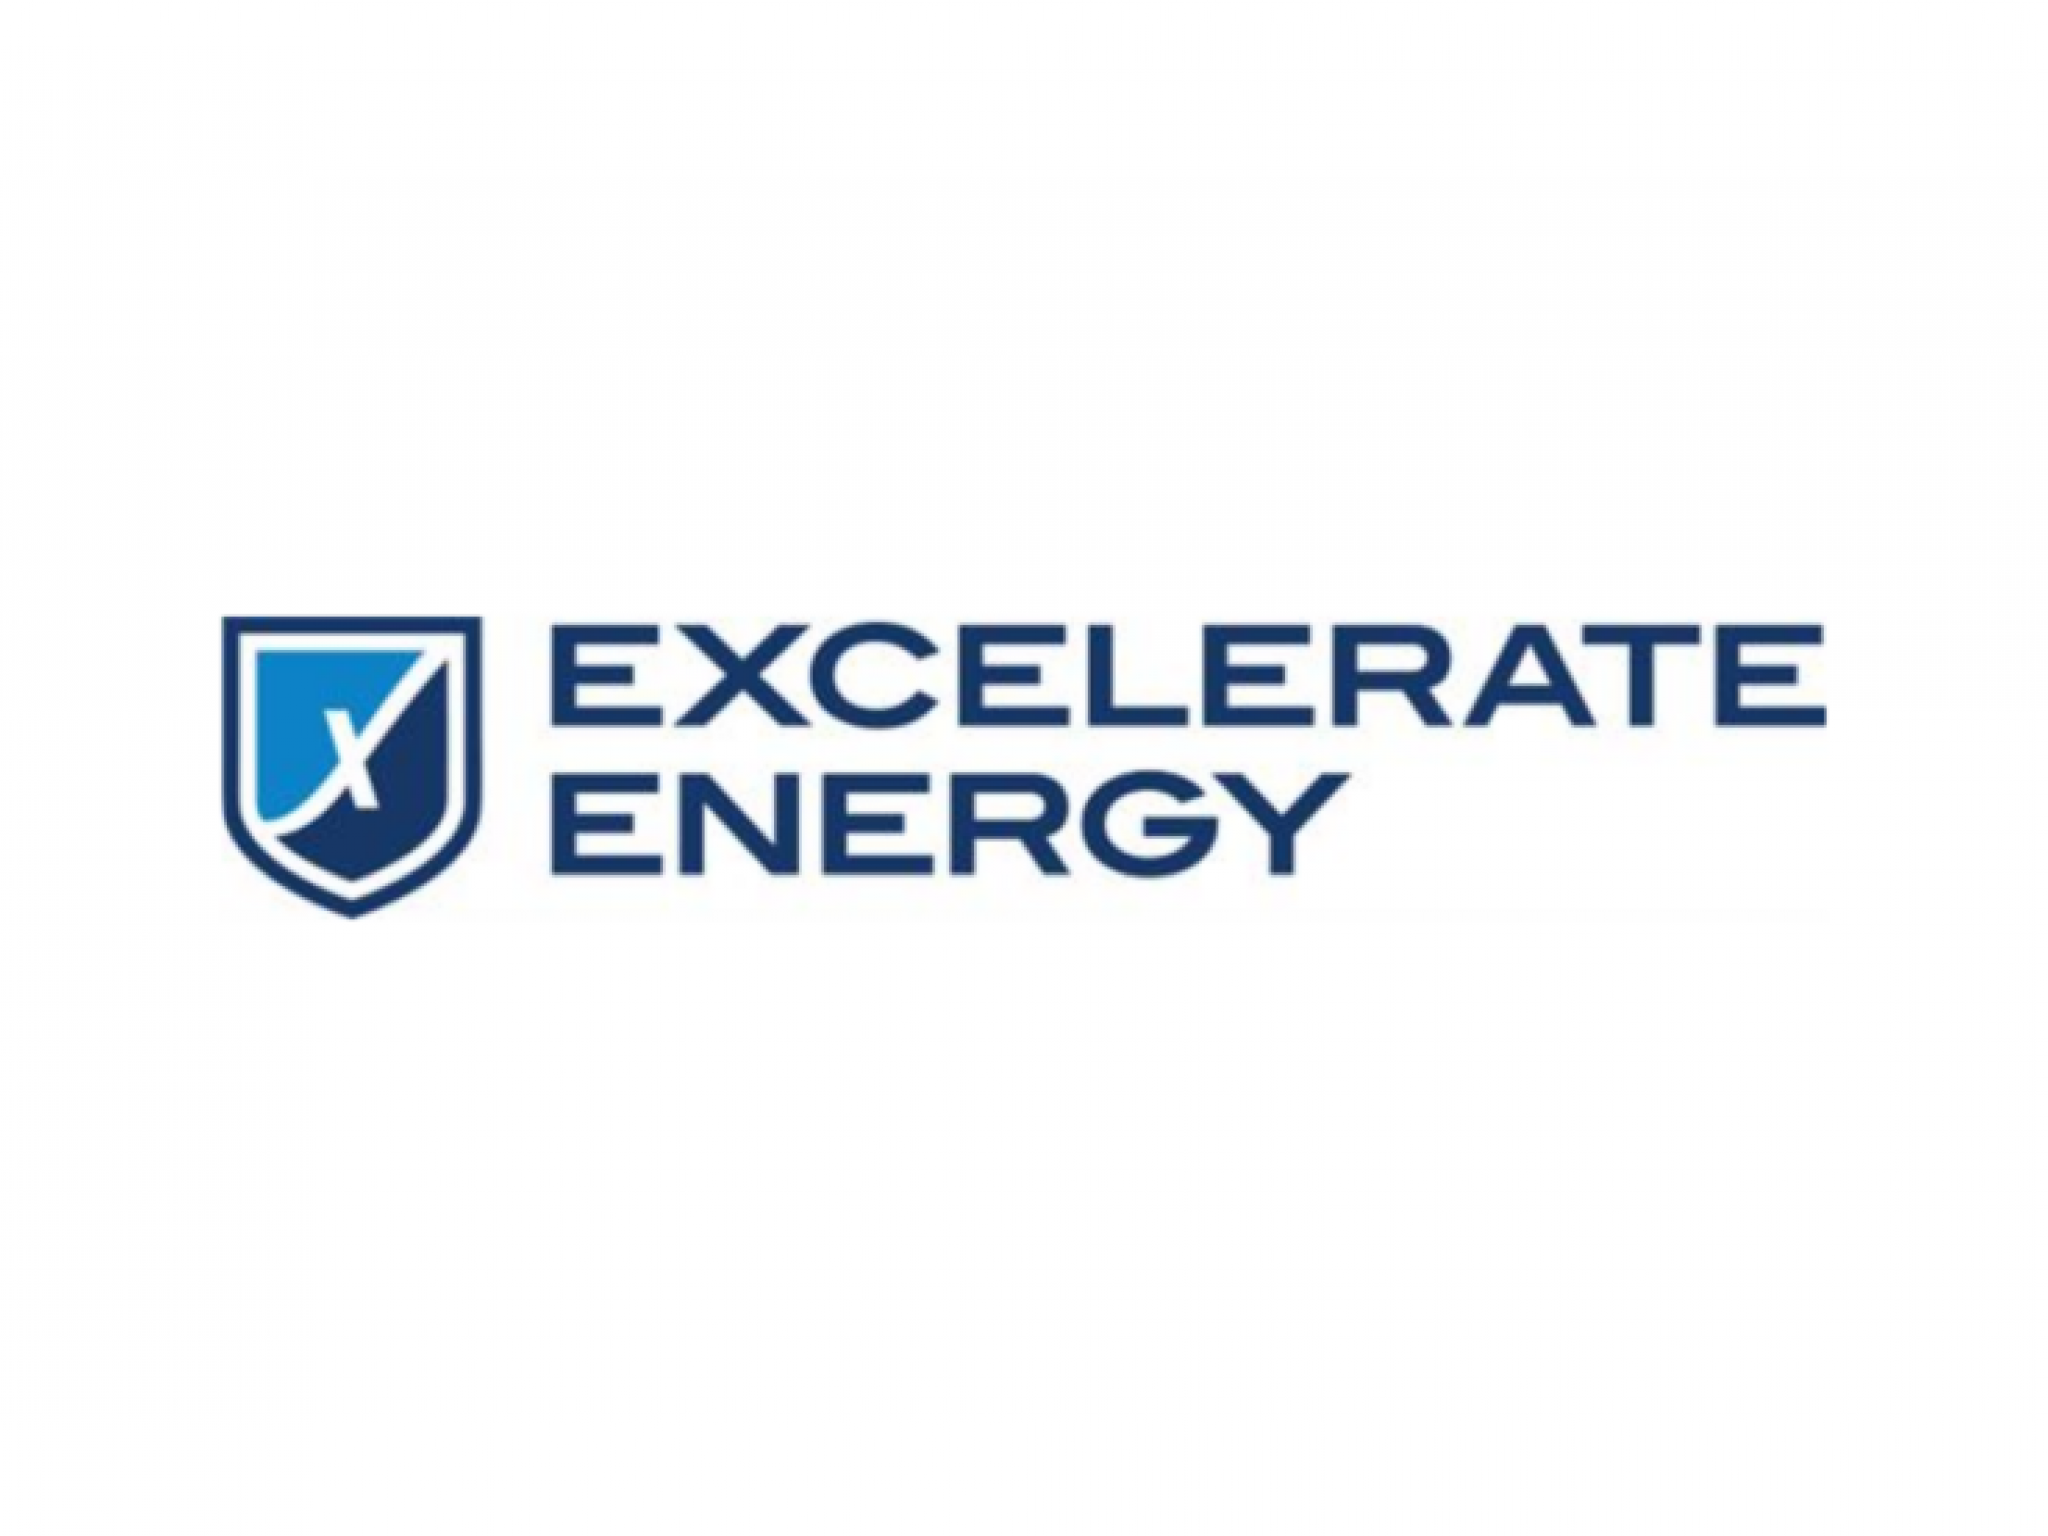  excelerate-and-qatarenergy-seal-15-year-lng-pact-for-bangladeshs-energy-surge 